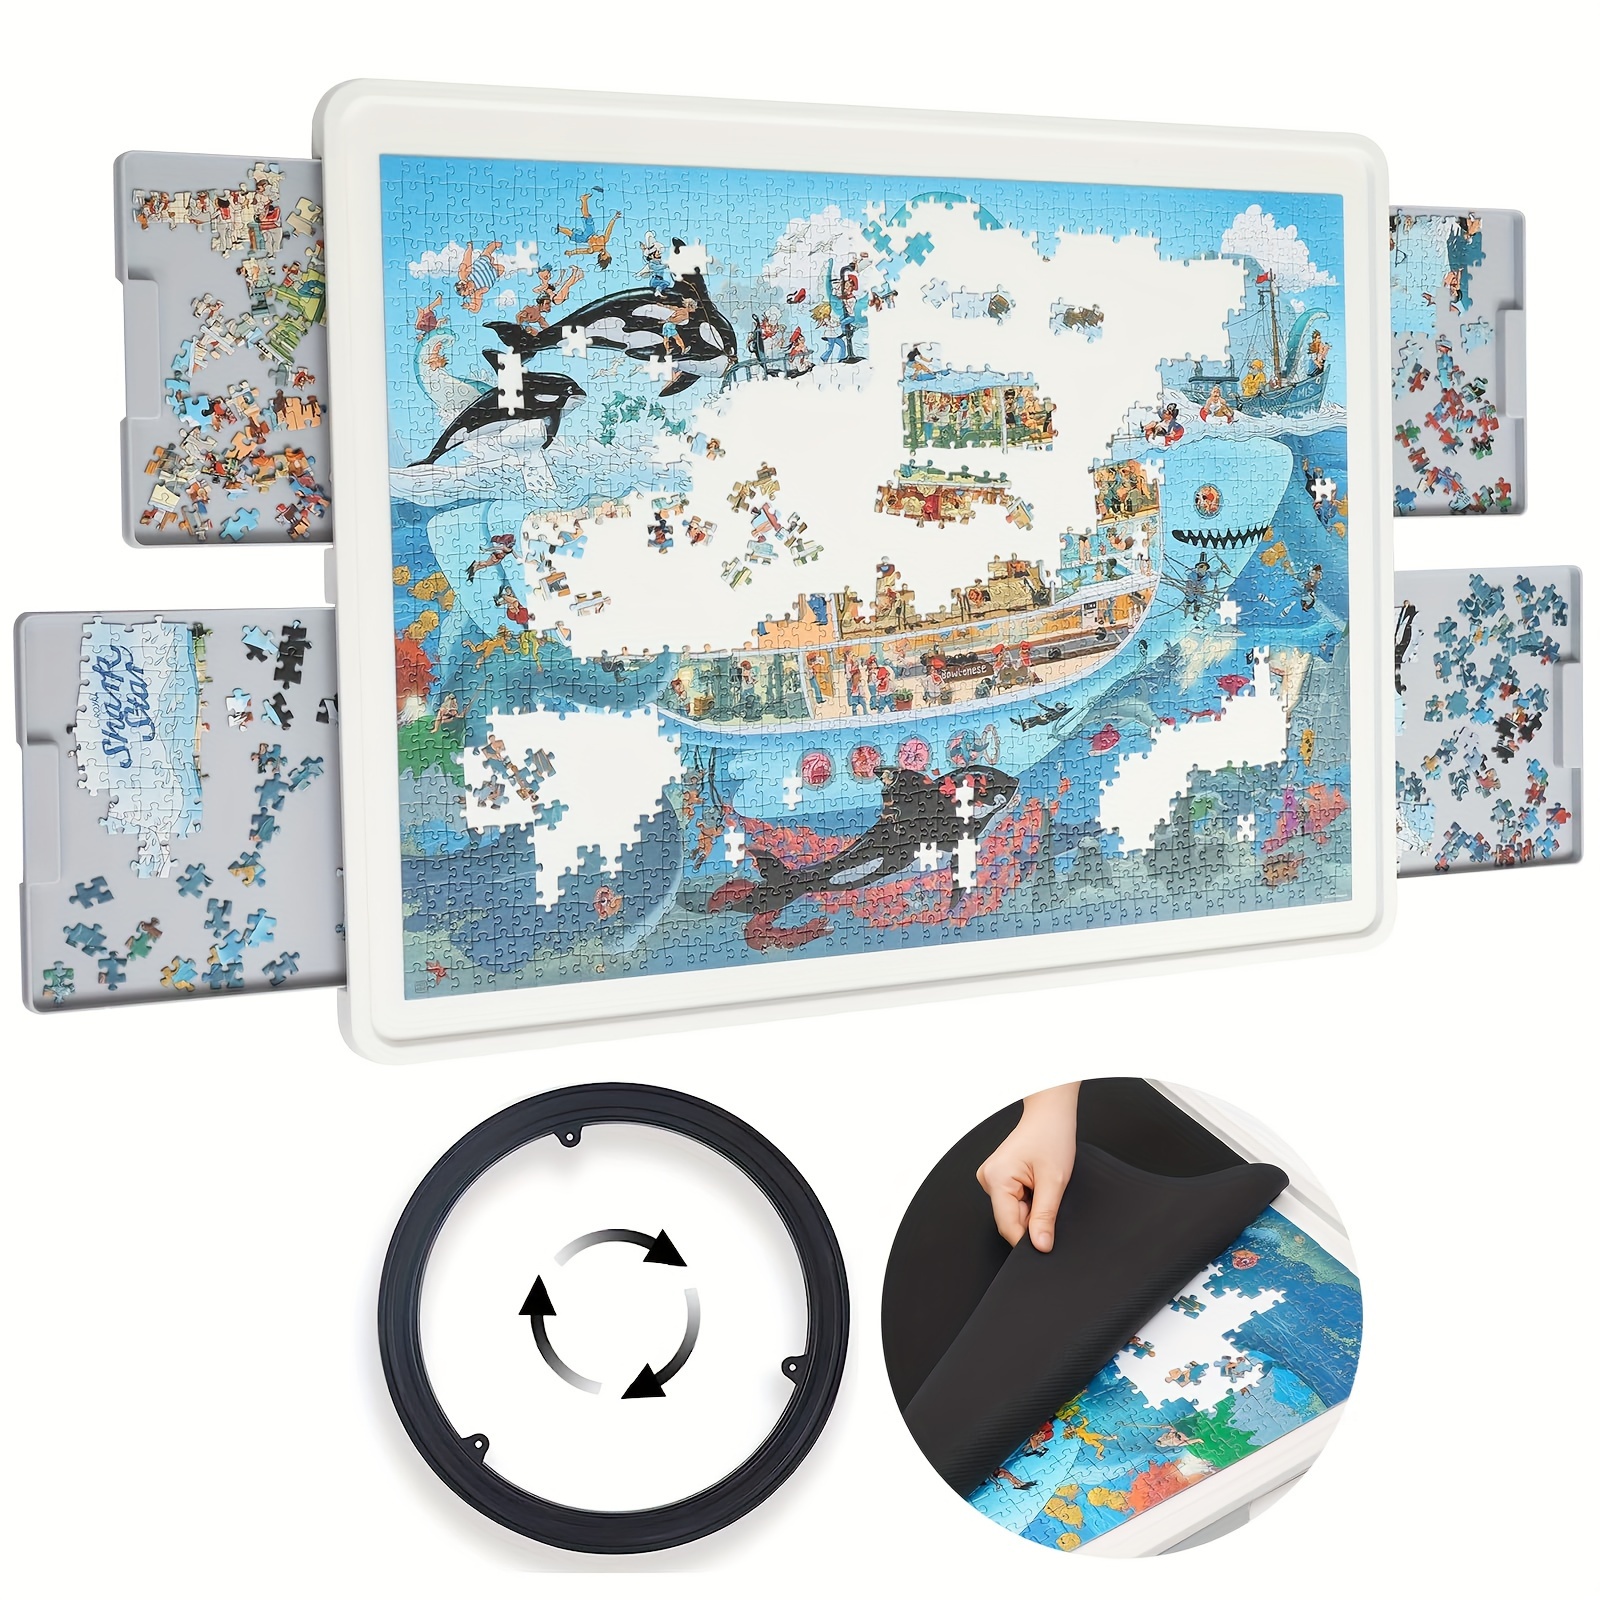 

Portable 1500 Pieces Rotating Plastic Puzzle Board With Drawers And Cover, 35"x27" Portable Table For Adults